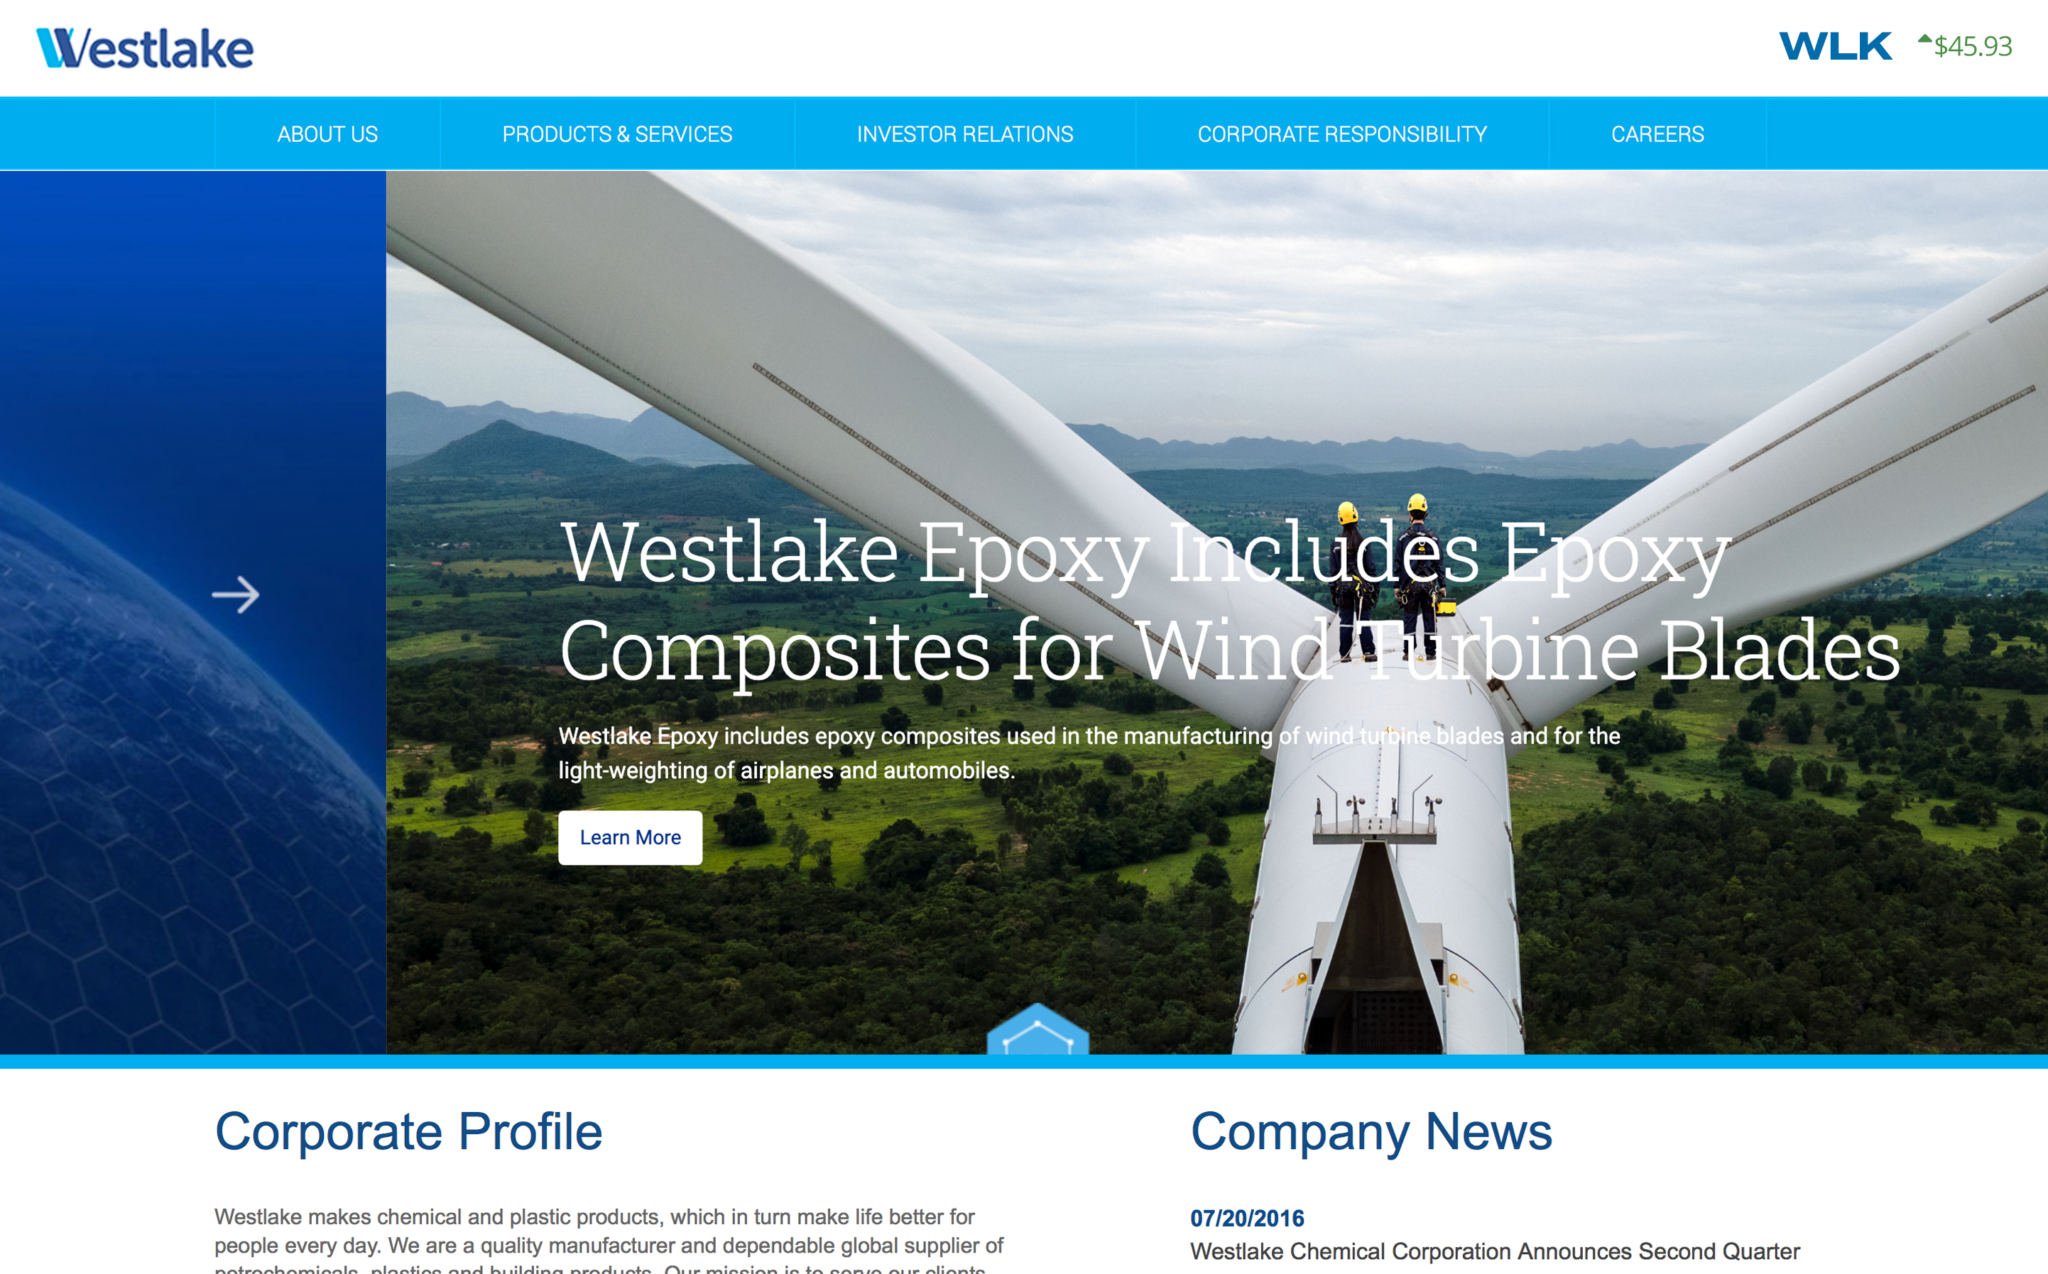 Web site for the energy industry in Houston, Texas